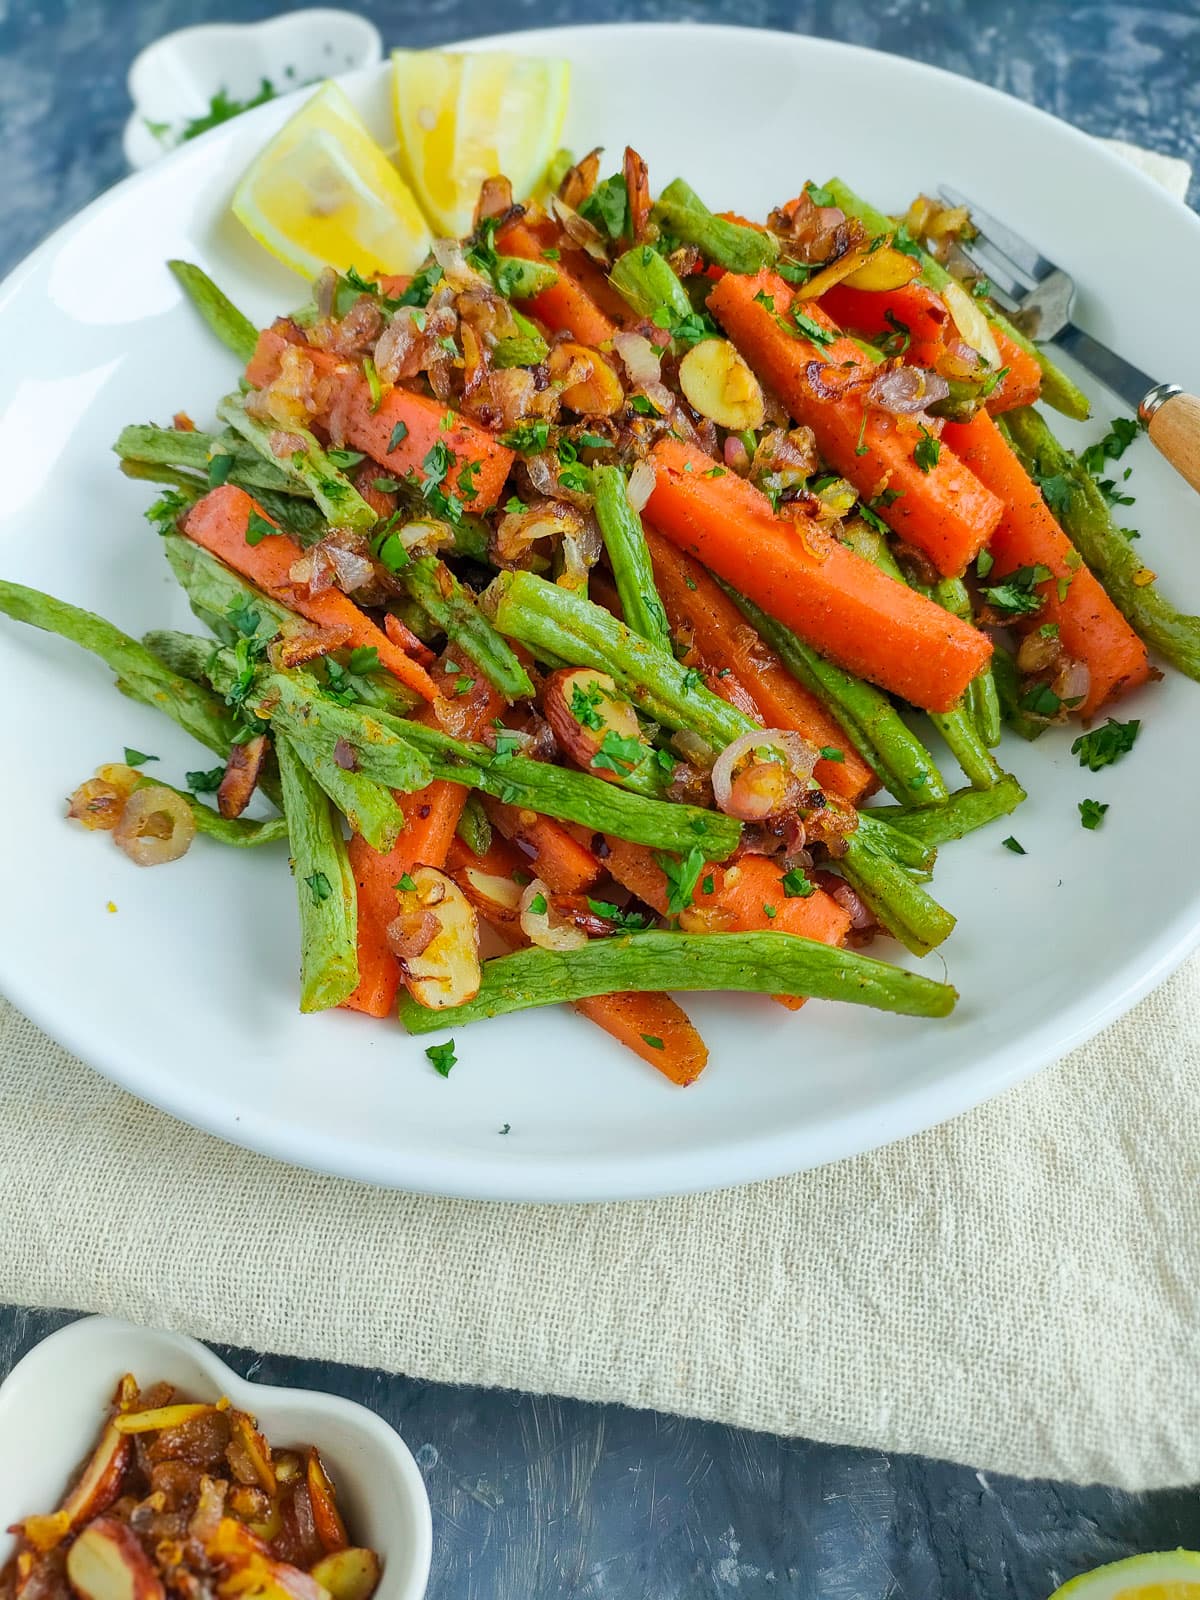 Roasted green beans and carrots with toasted almond-shallot topping and lemon wedges on a white plate.